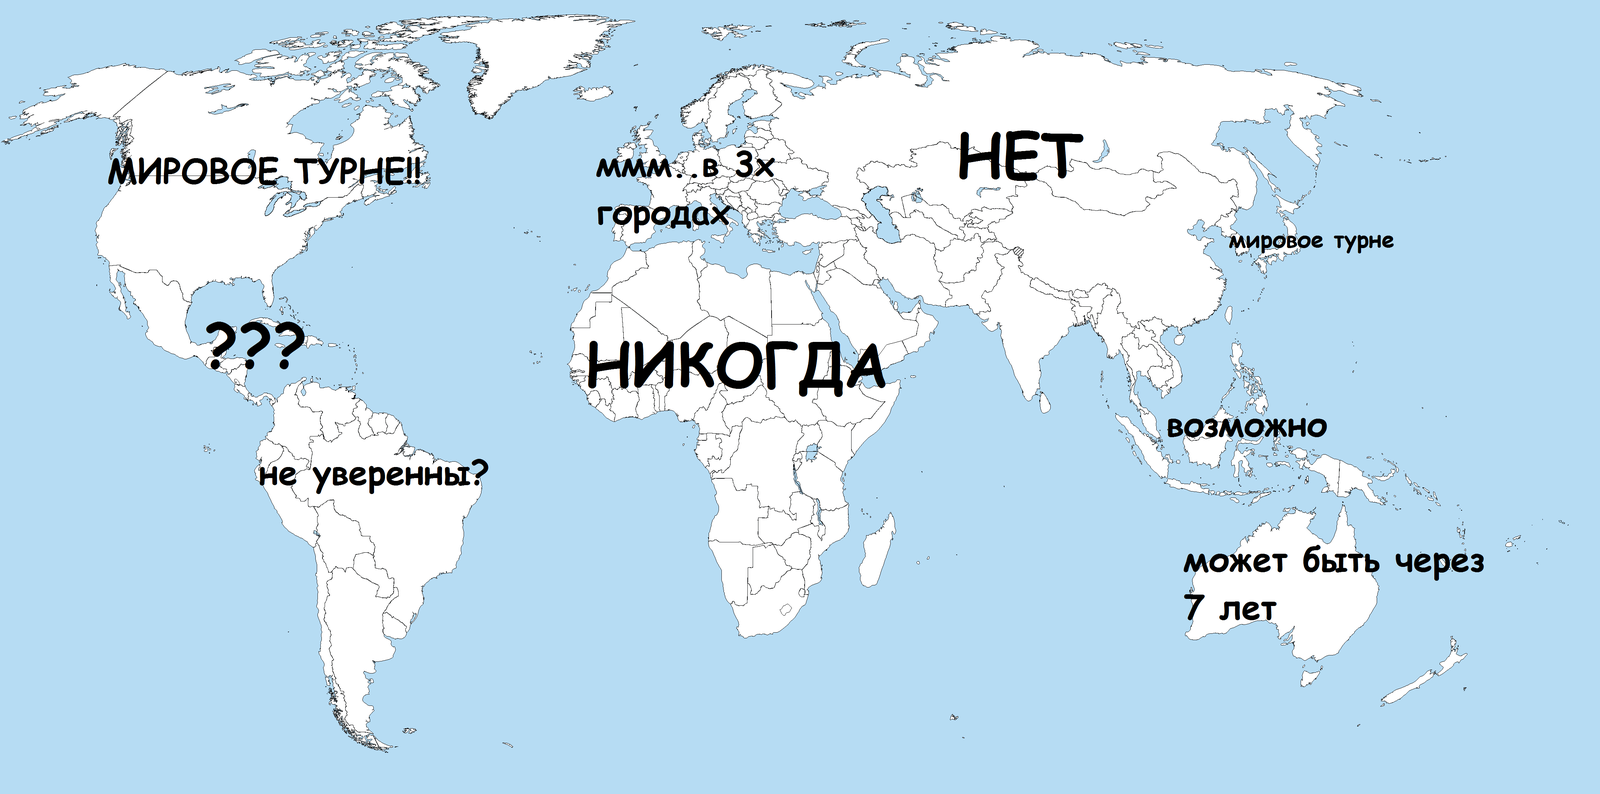 When your favorite band is on a world tour - world tour, Music, Concert, World map, Translation, 9GAG